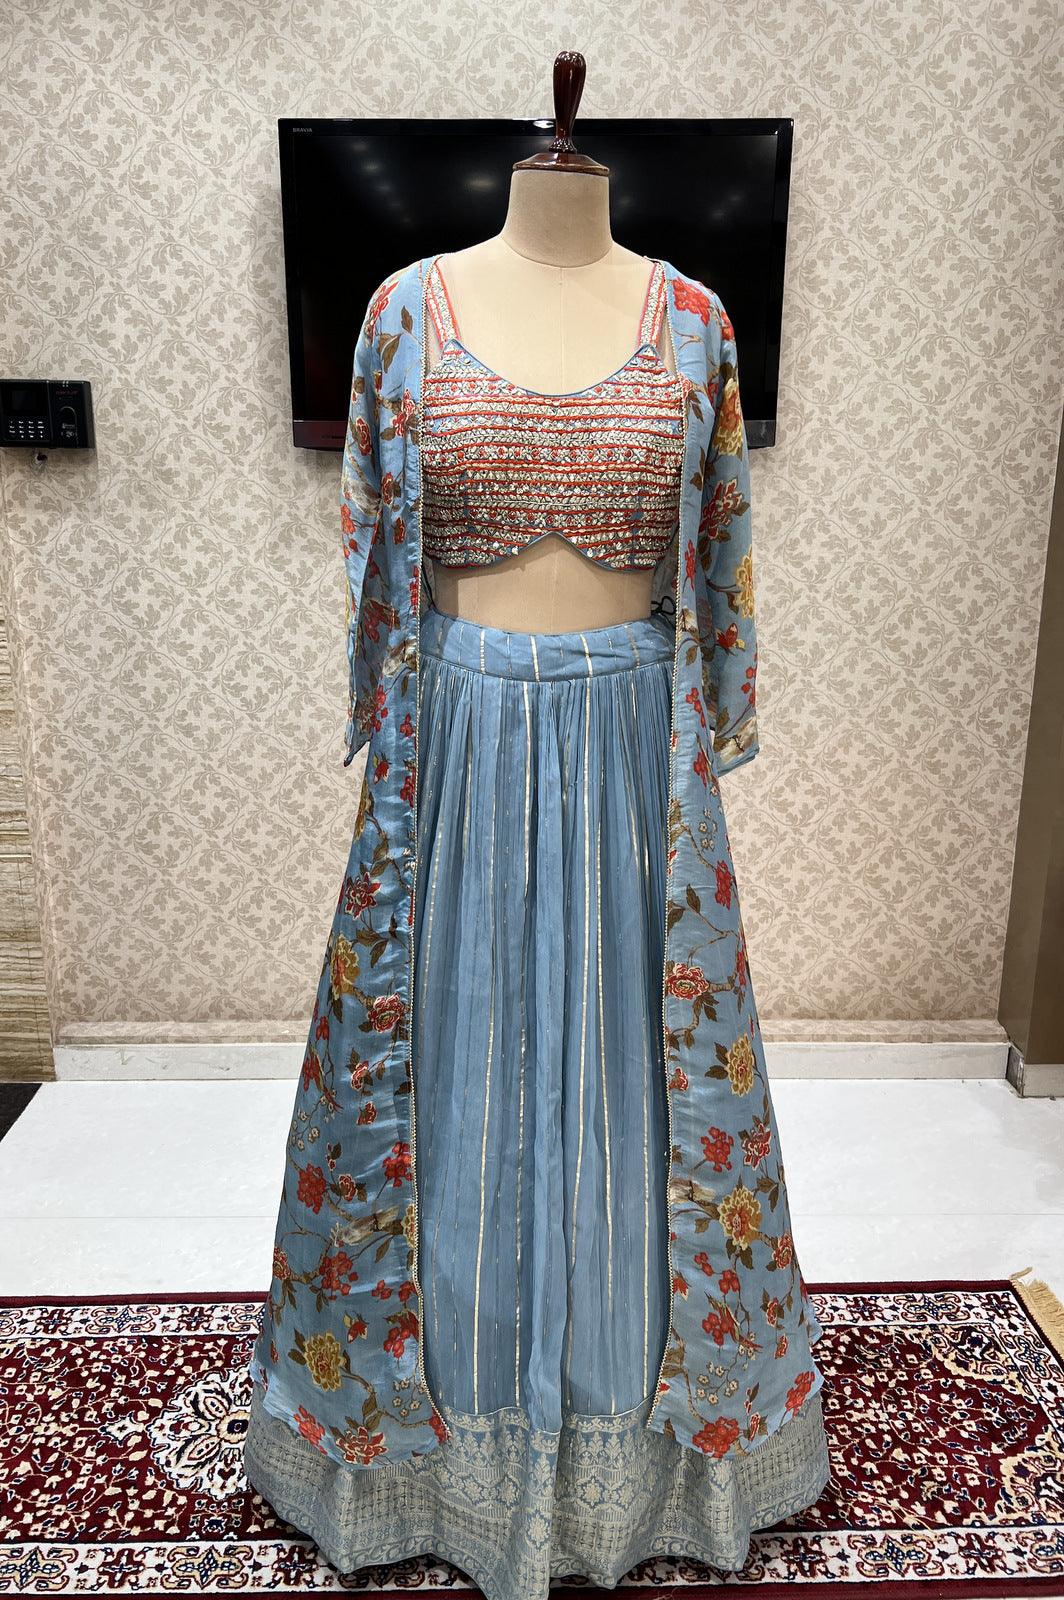 6 'Not So Heavy' Lehenga Designs For A Cool Traditional Look | Kalki  Fashion Blogs